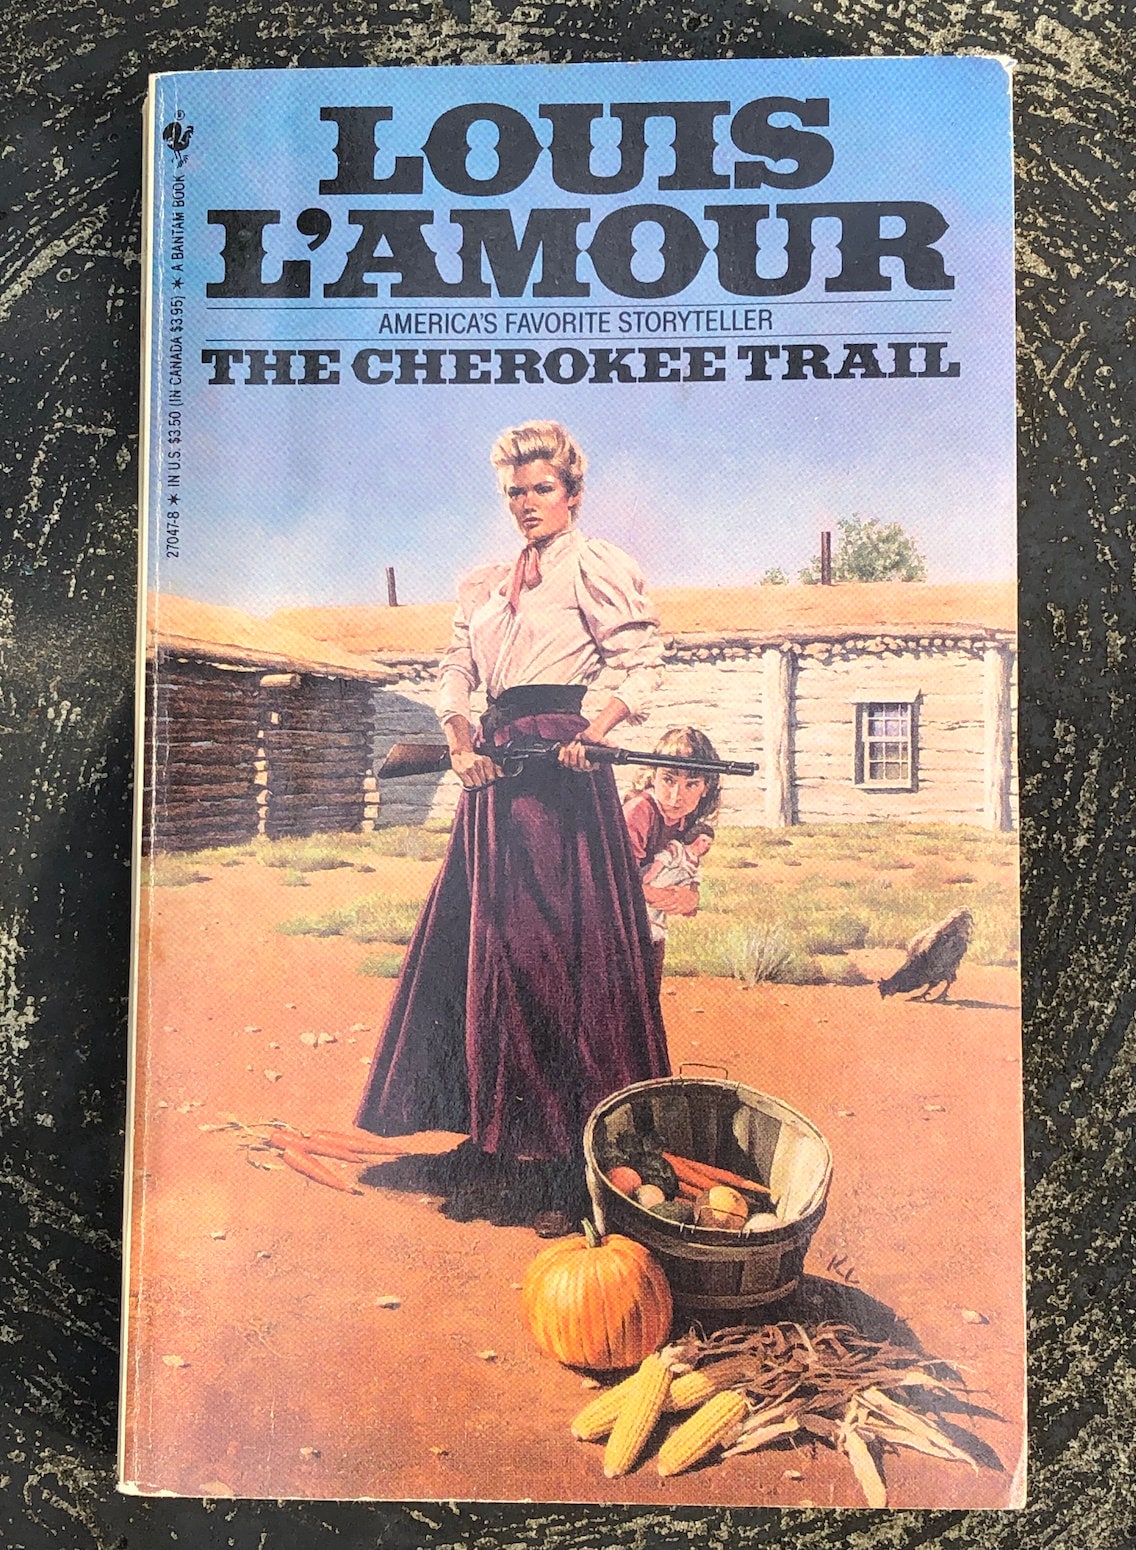 Ride the River (Used Hardcover) - Louis L'Amour – REACH Literacy